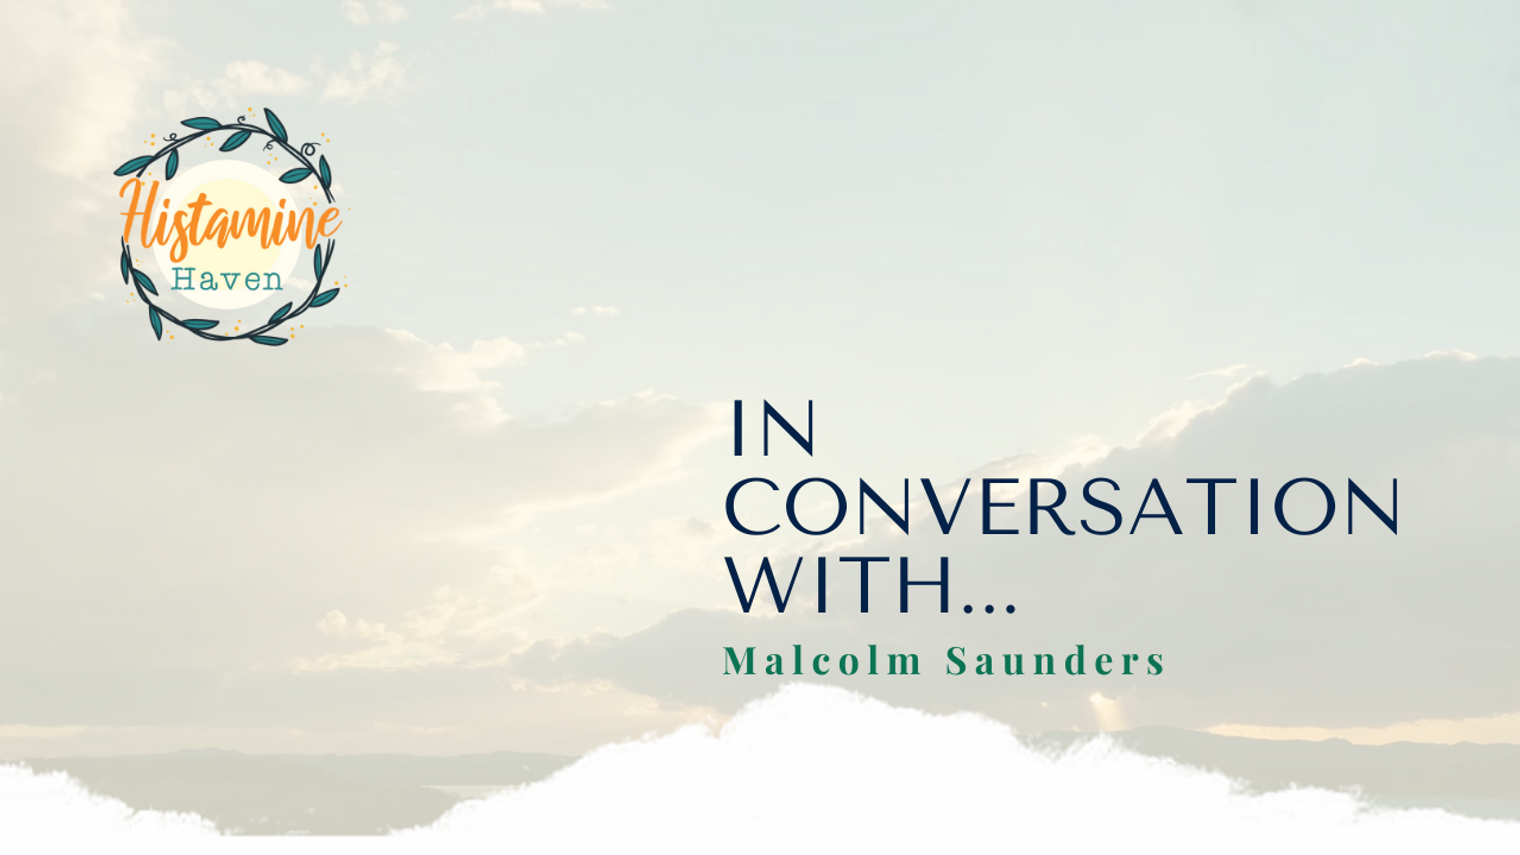 In conversation with Malcolm